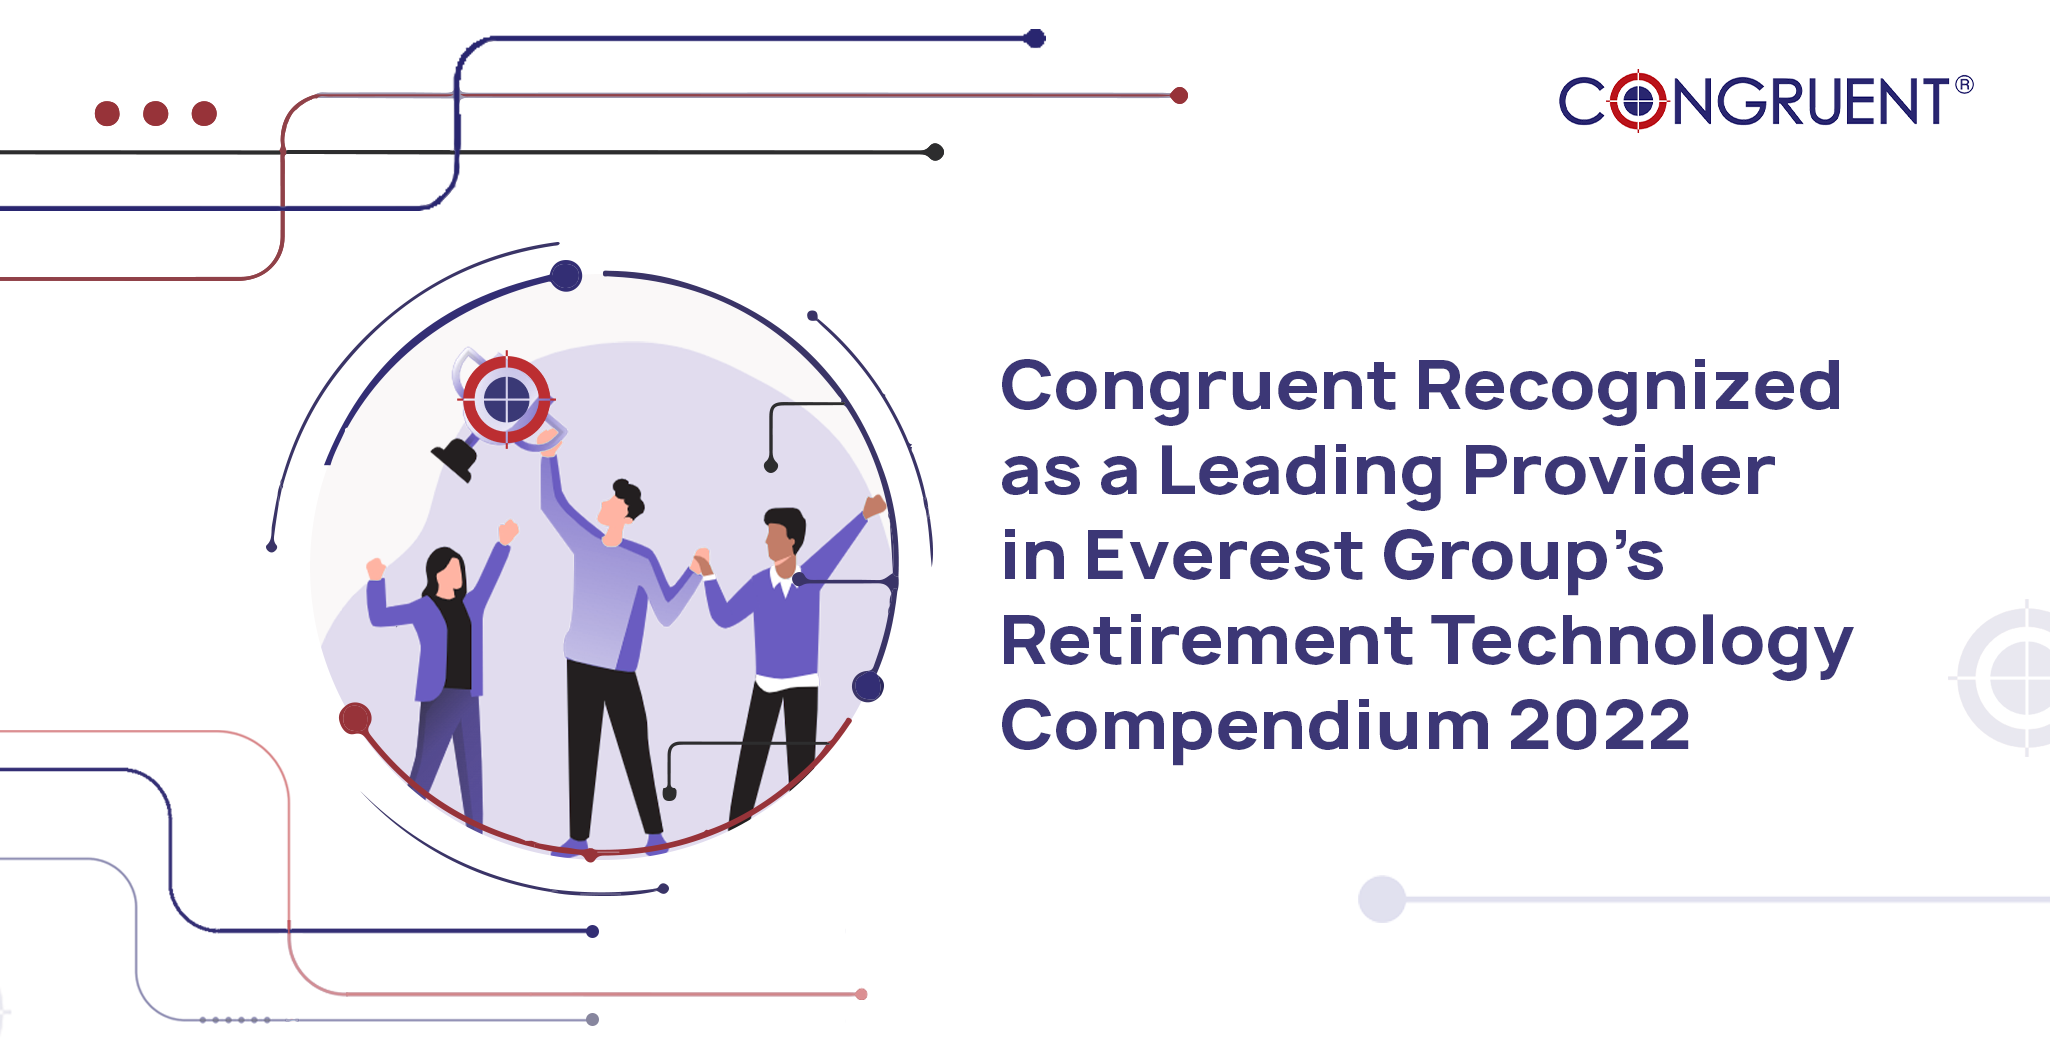 Congruent Recognized as a Leading Provider in Everest Group’s Retirement Technology Compendium 2022